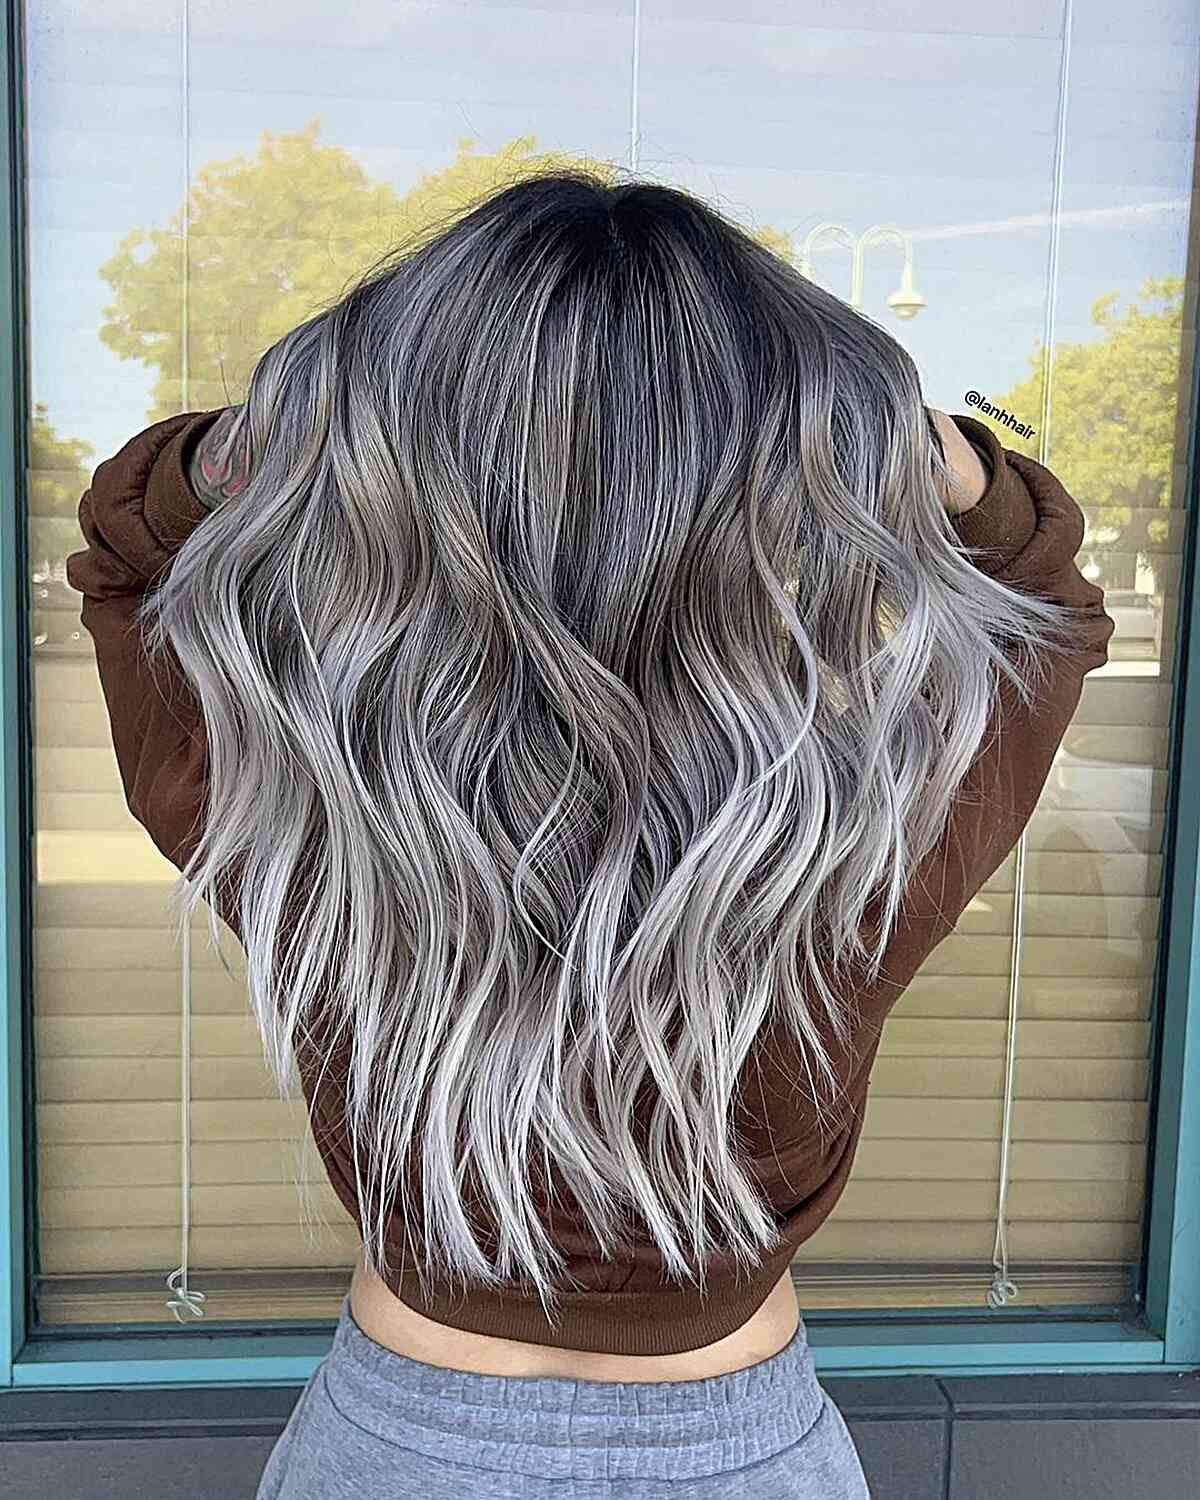 Ash Blonde Balayage with Darker Roots and blunt ends